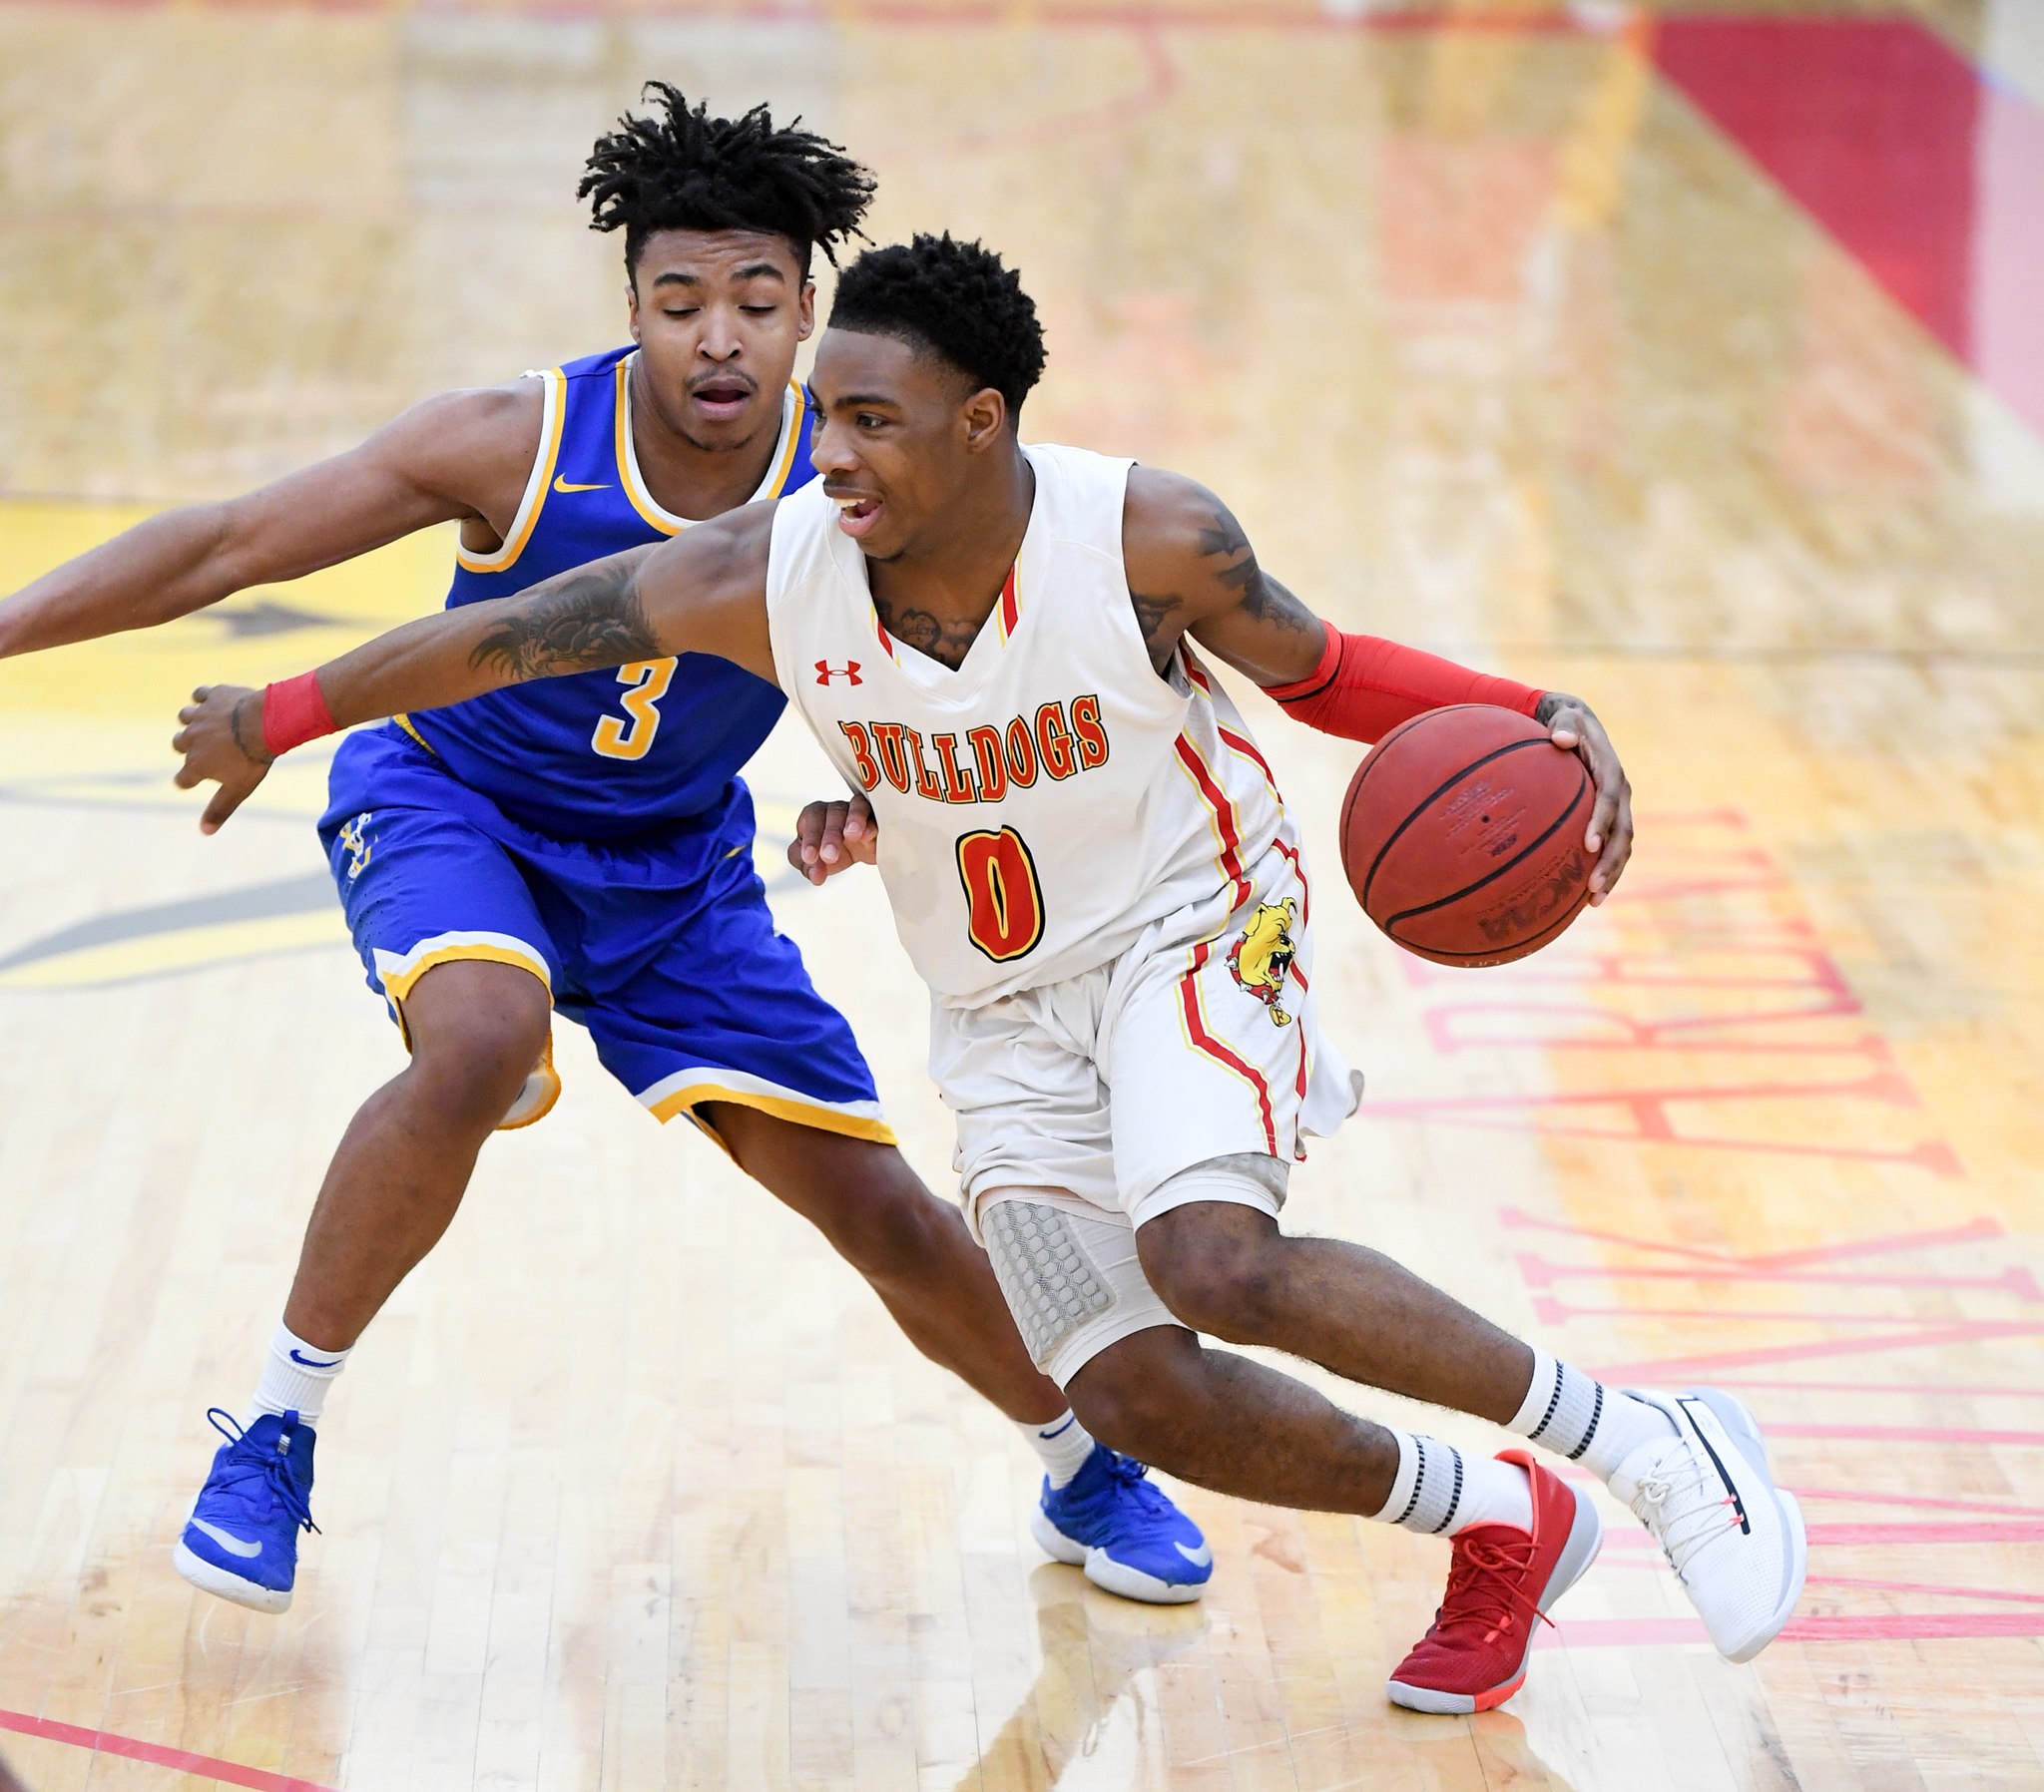 Ferris State Battles To The Wire At Lake Superior State In HIgh-Scoring Setback